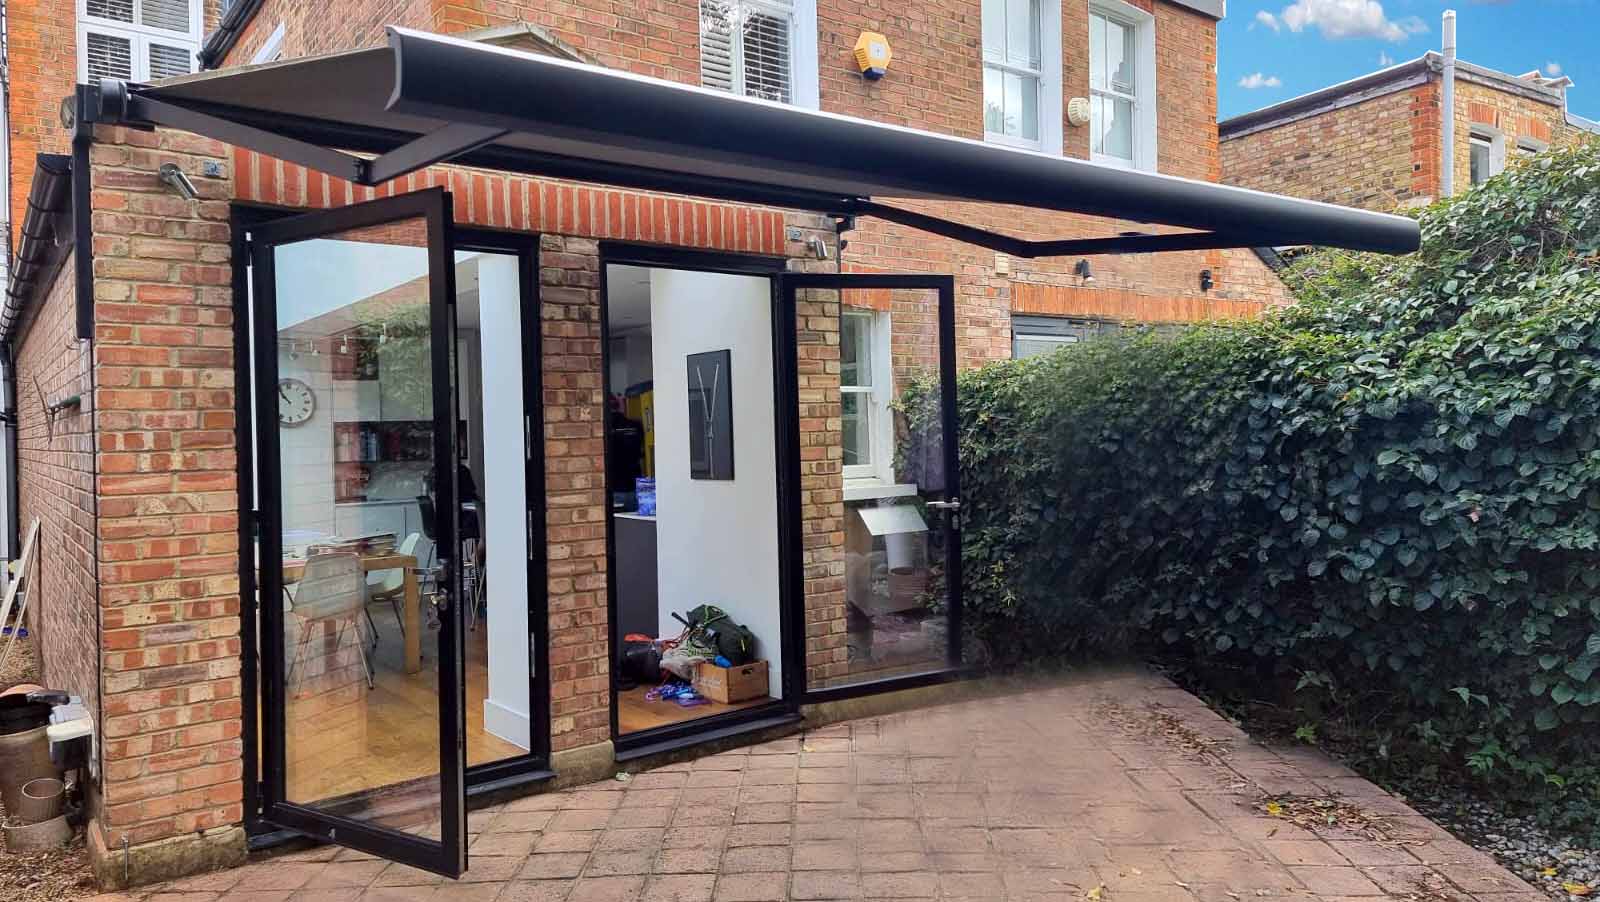 A close-up of a motorised retractable awning, showing the durable fabric and sleek design.